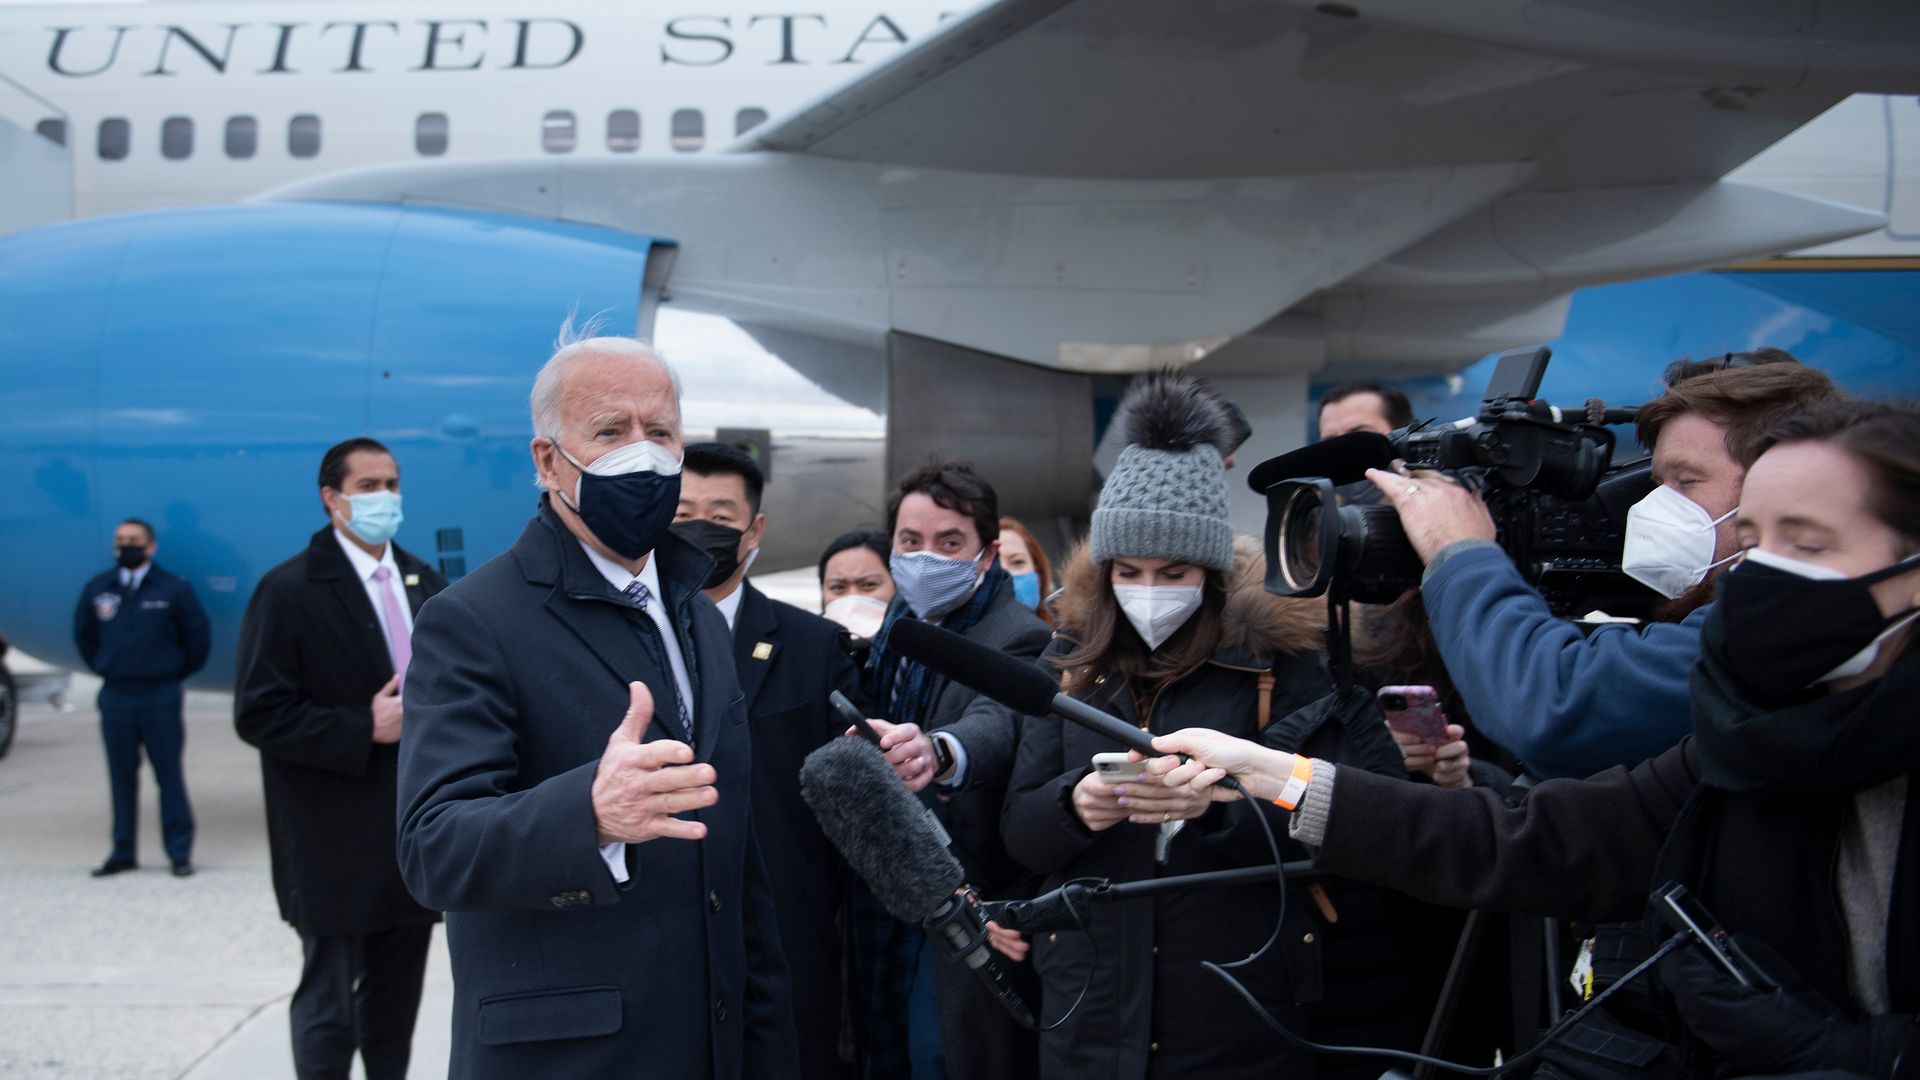 President Biden is seen speaking with reporters under the wing of Air Force One.